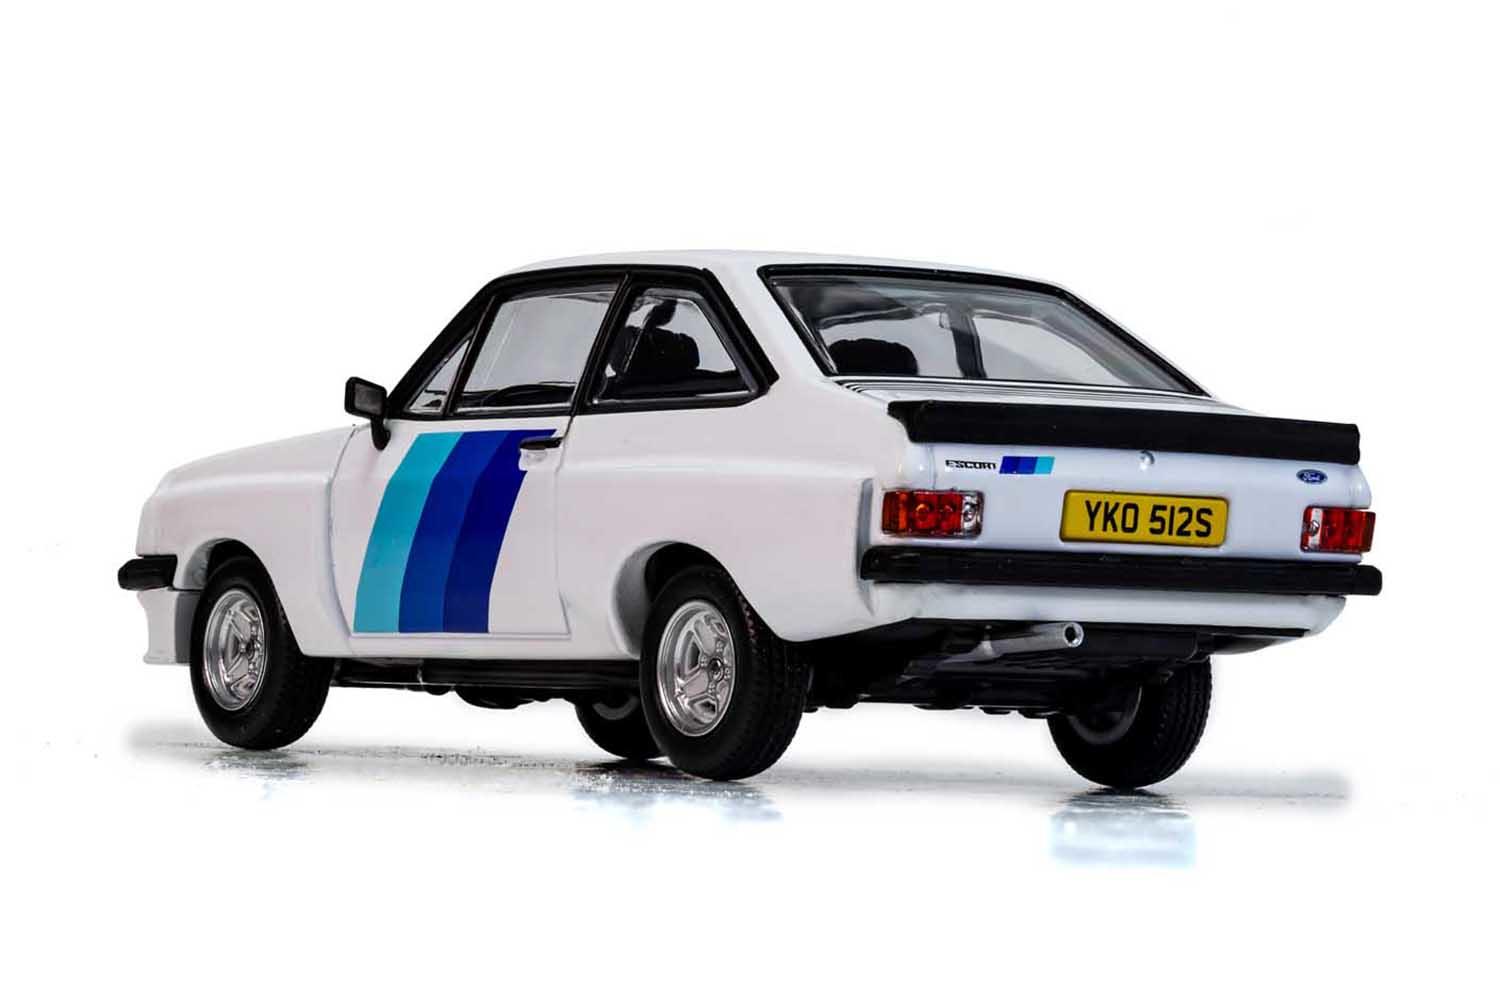 Ford Escort mk 2 RS2000 Series X in diamond white 1:43 scale model from Corgi  Vanguards, Limited Edition model